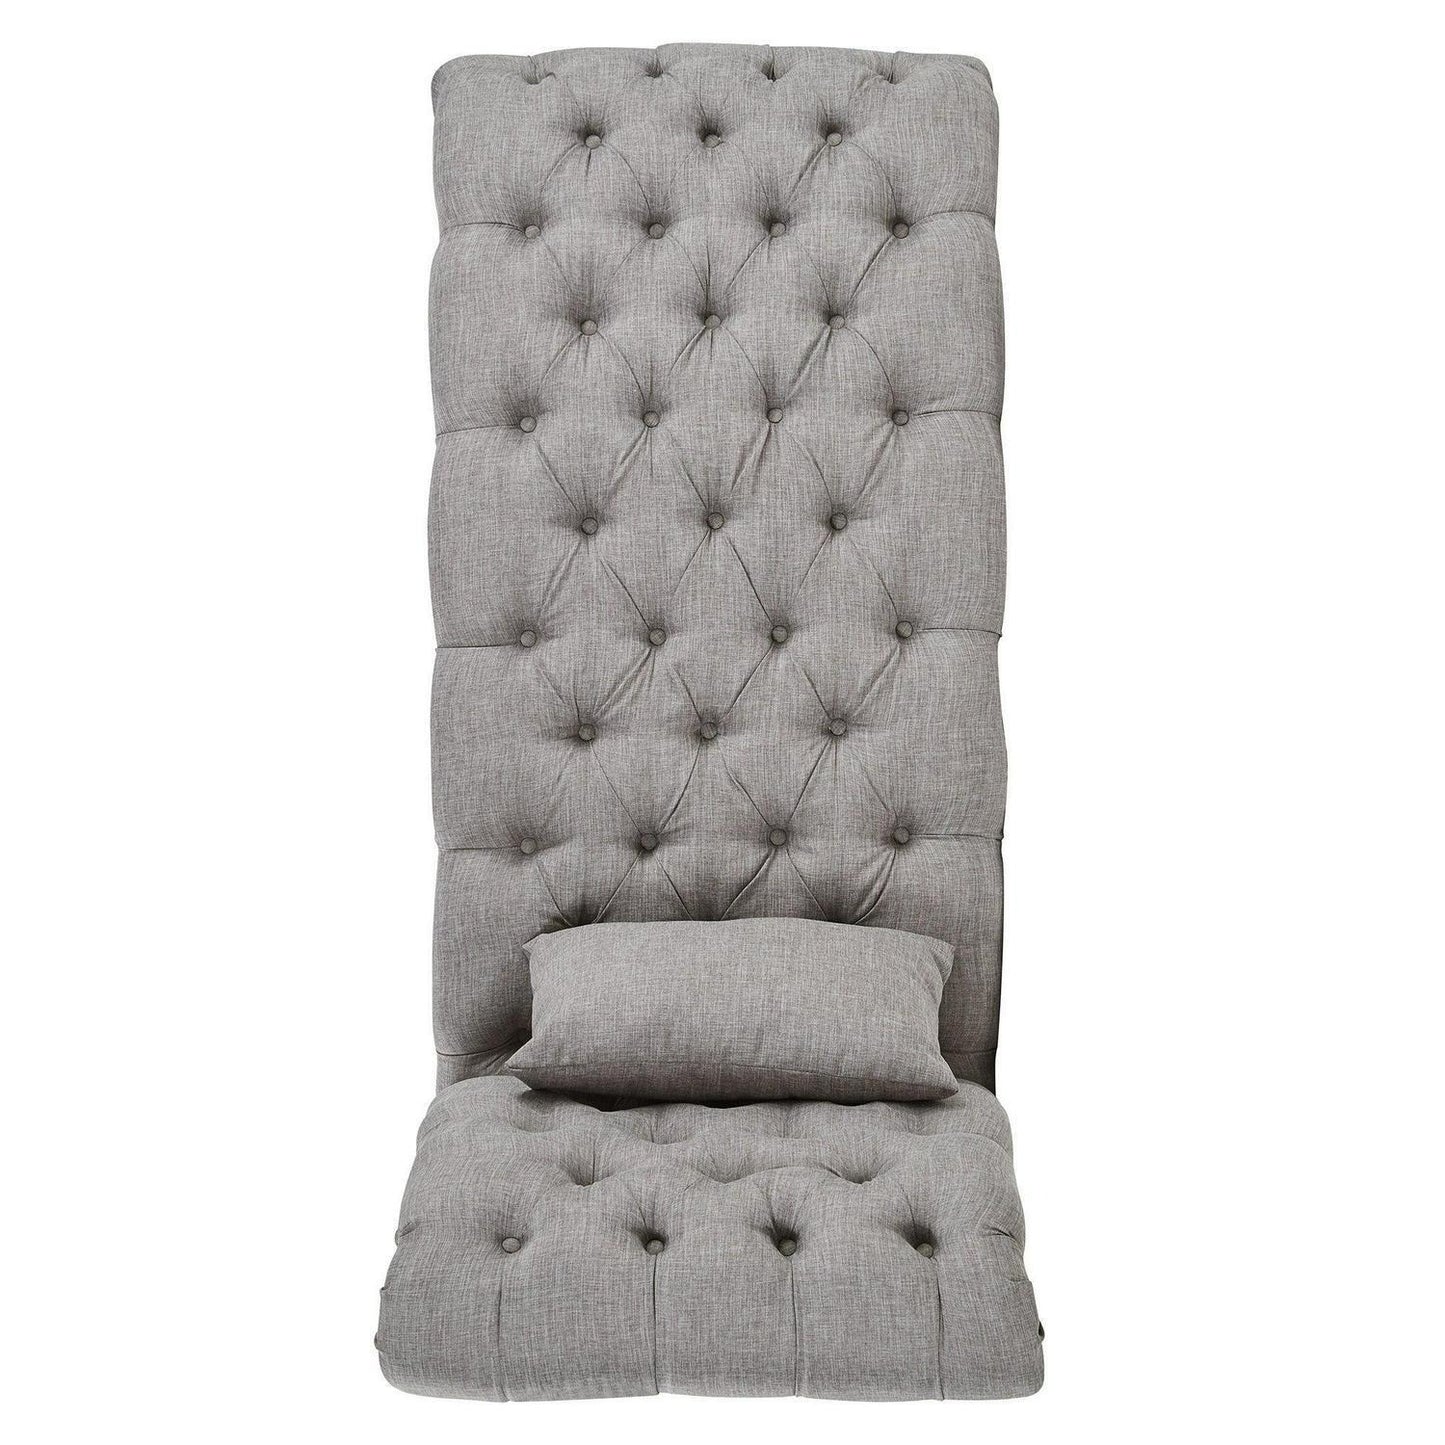 Oversized Chaise Lounge Chair Sofa w/Pillow Light Grey Linen Upholstered